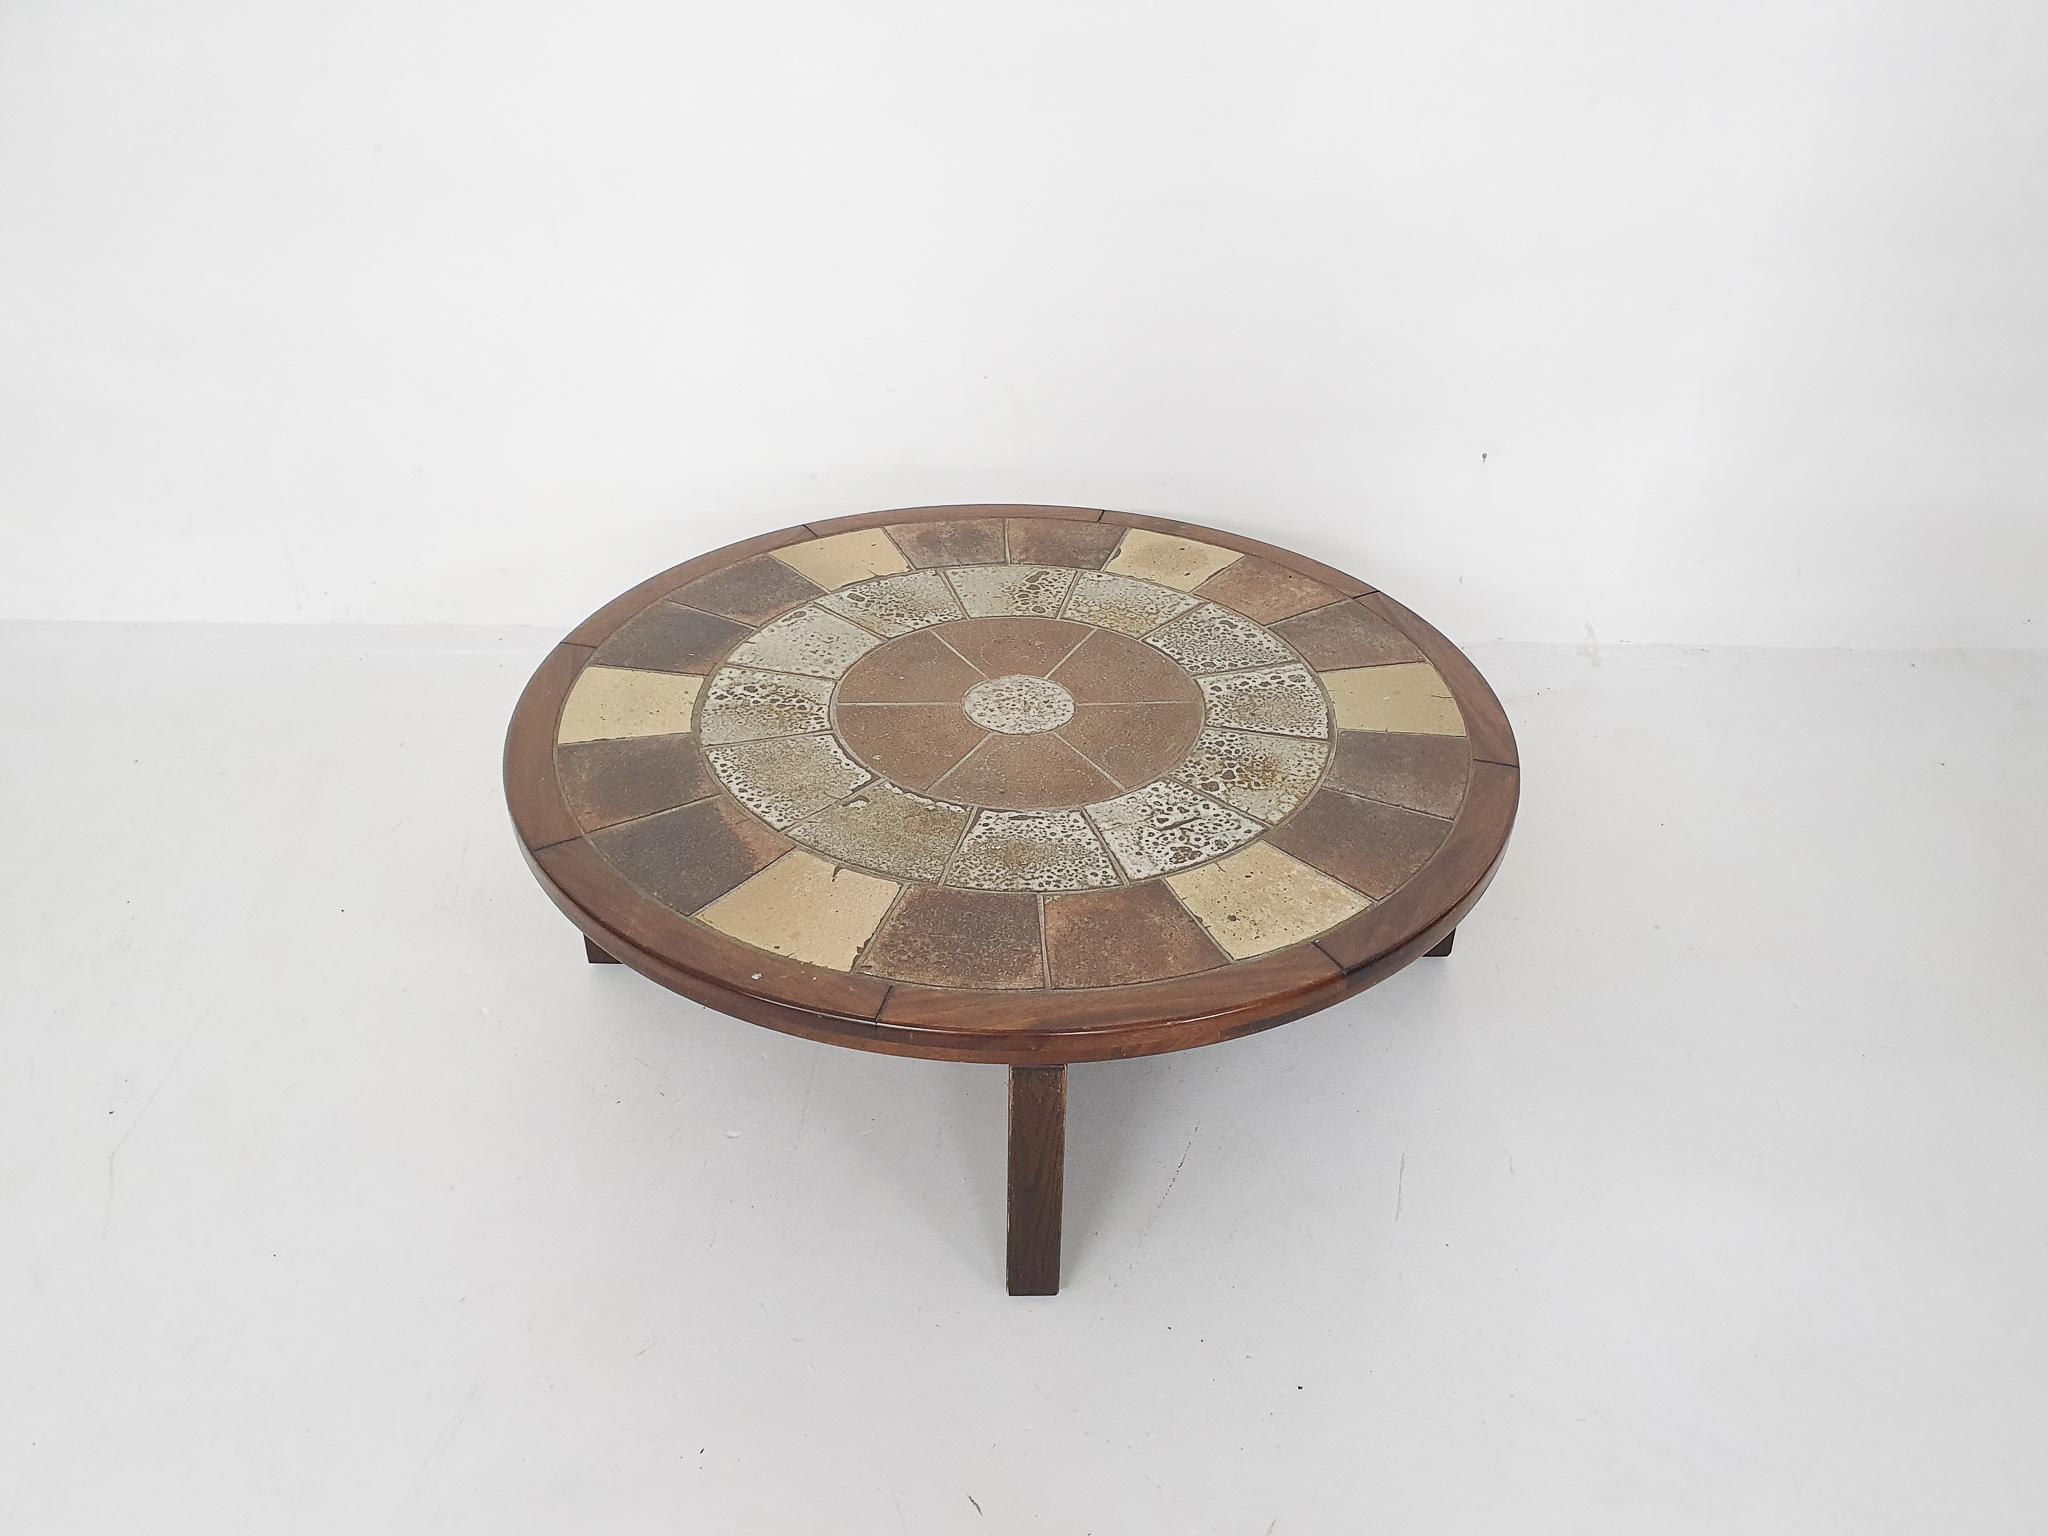 Design coffee table by Tue Poulsen for Haslev Møbelsnedkeri. Oak foot and stone inlay. In good condition.